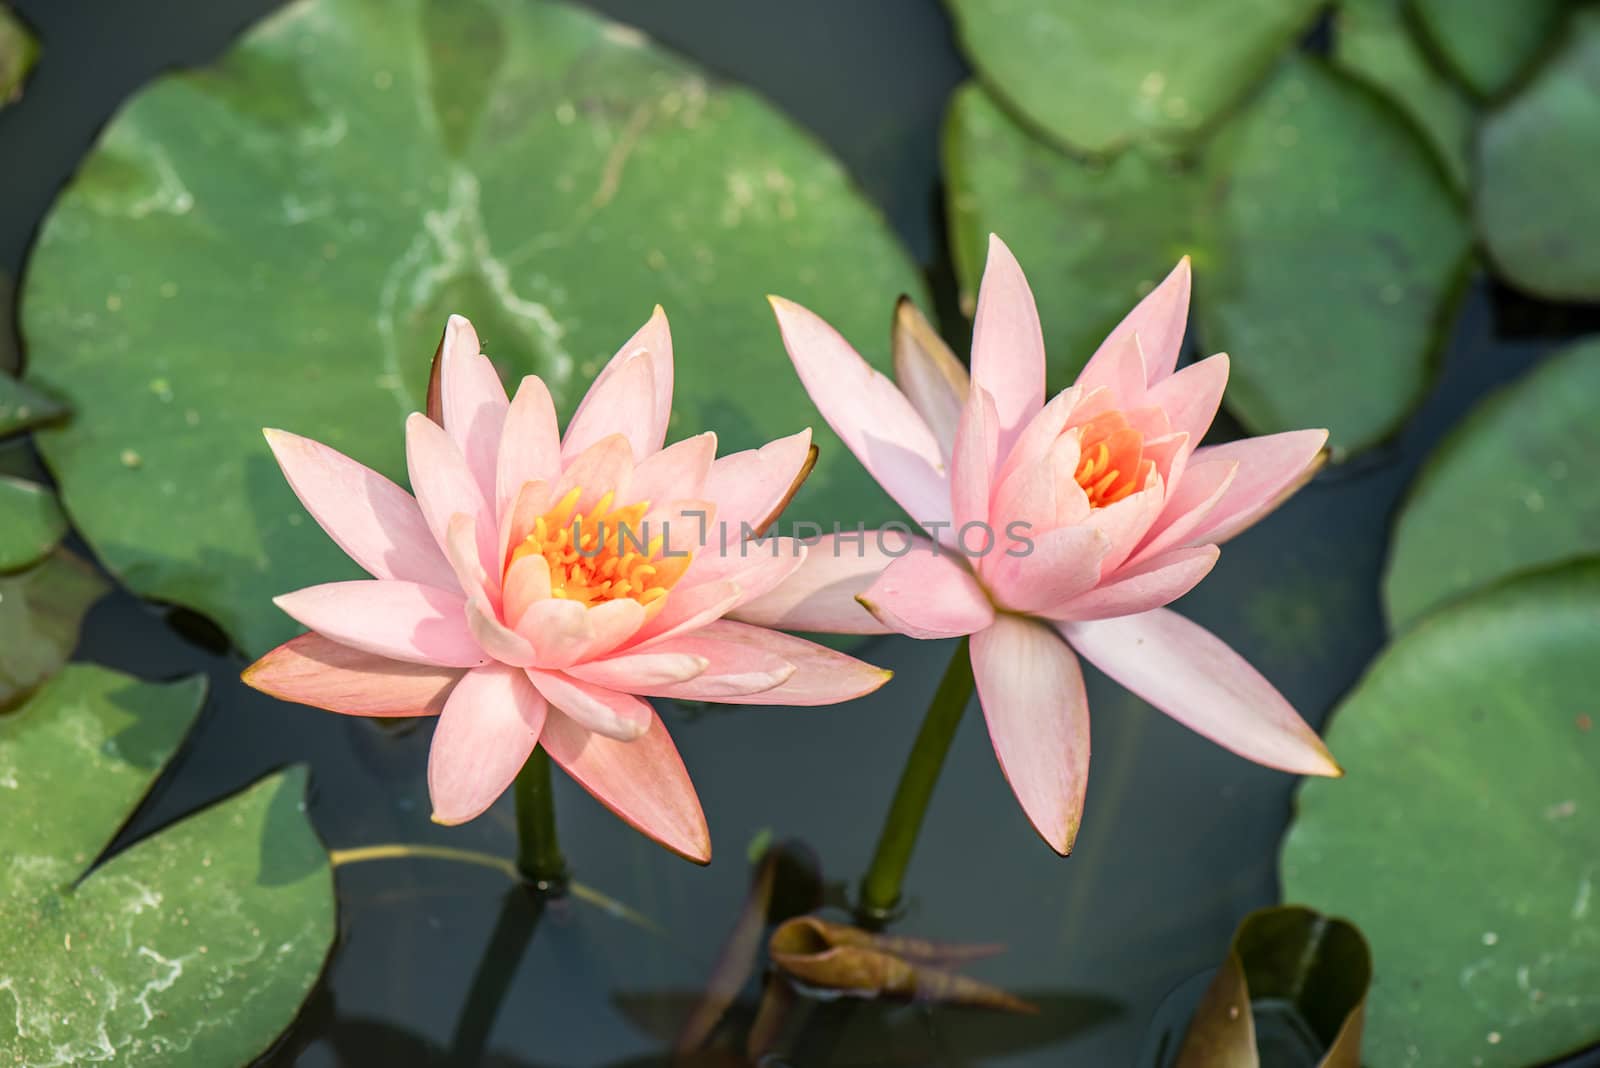 The beautiful light pink waterlily or lotus flower on green background.